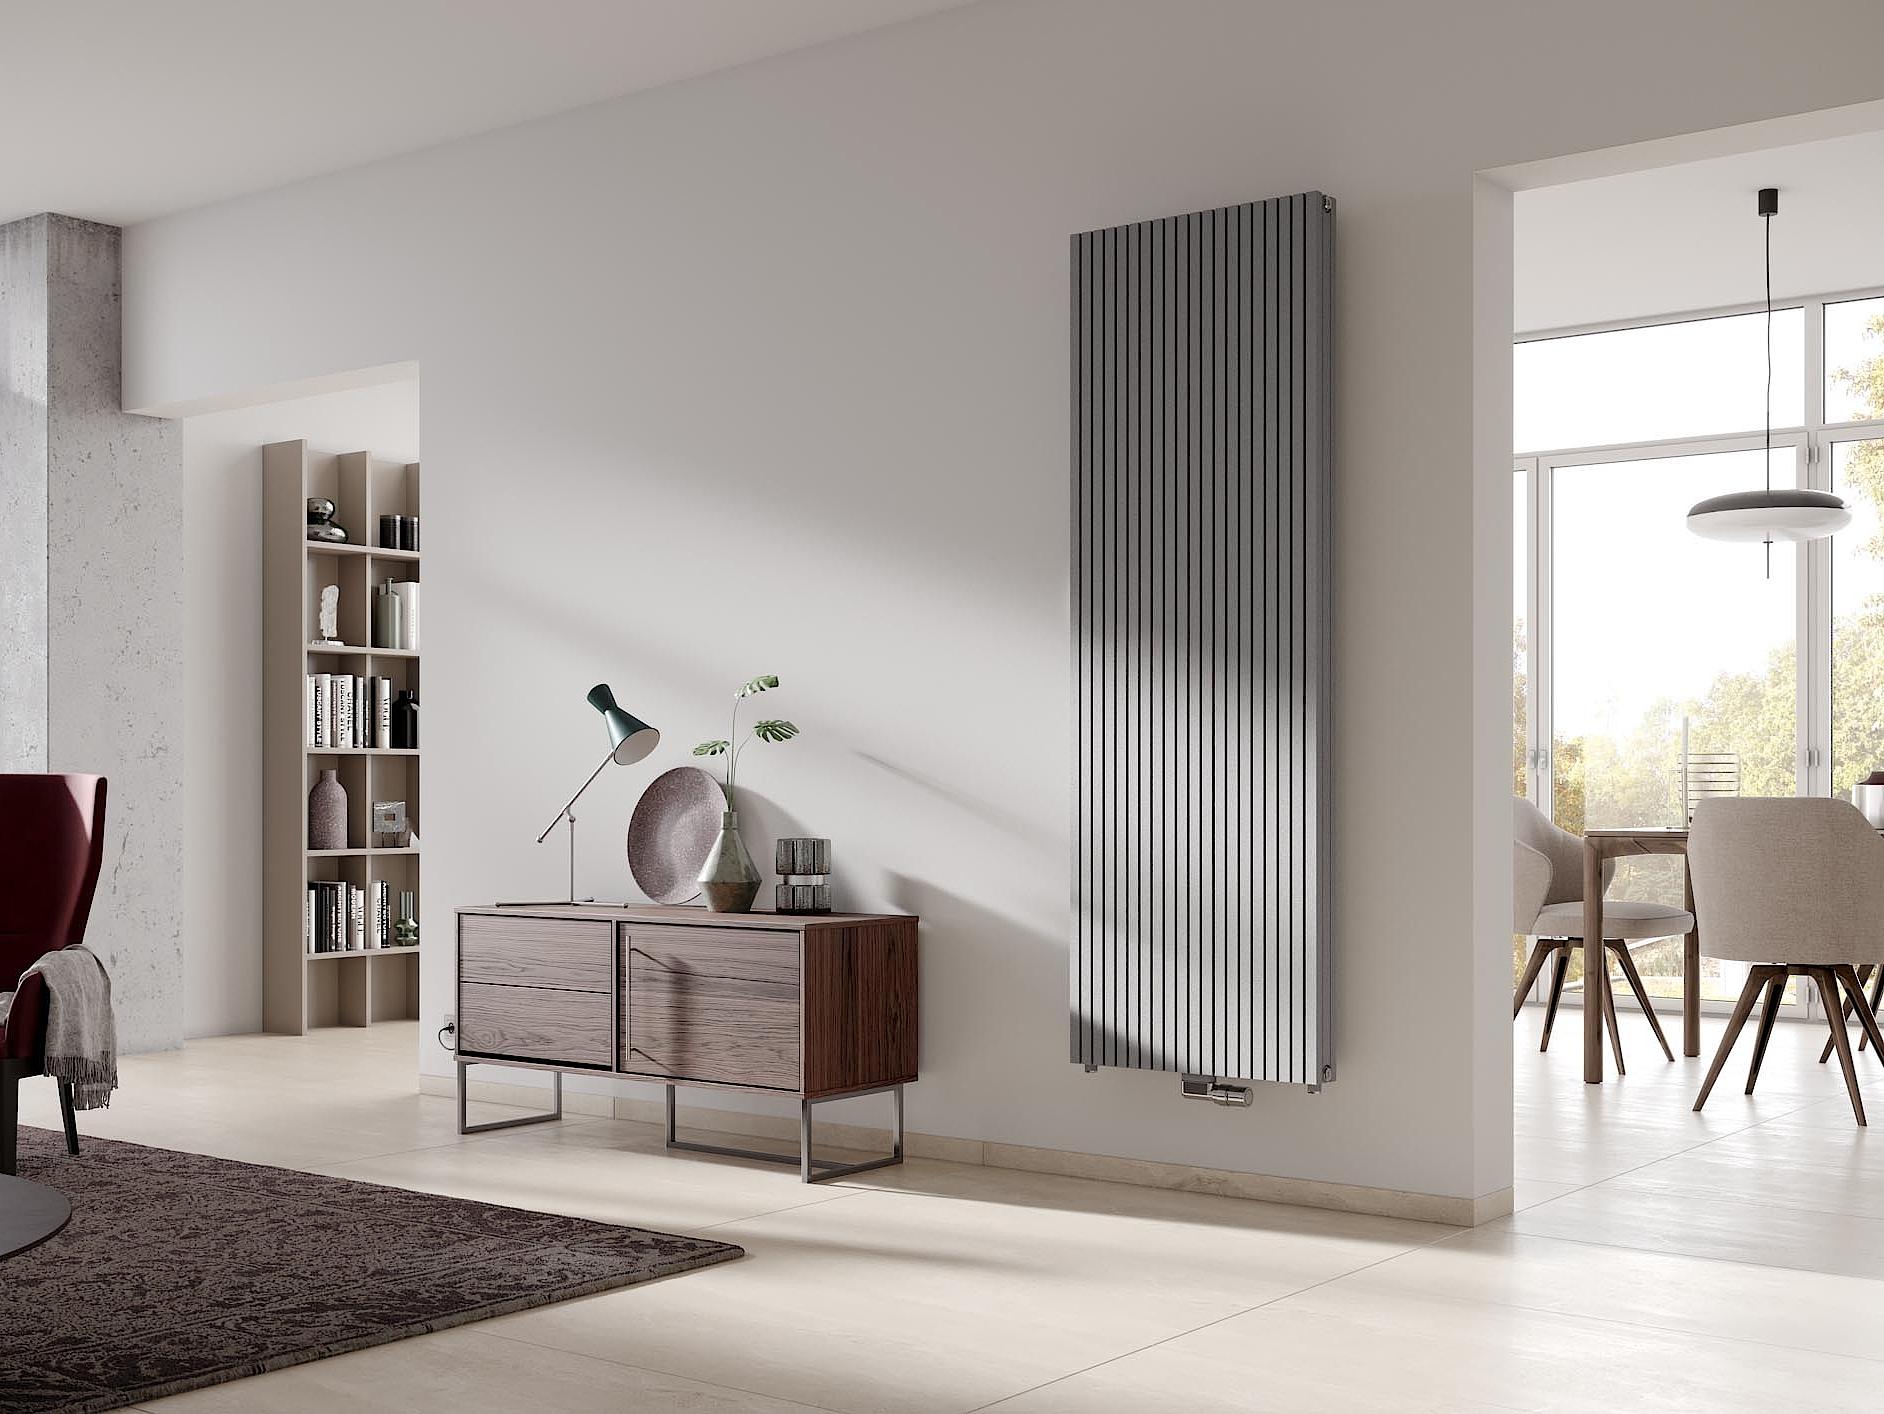 The Kermi Decor-Arte Pure designer and bathroom radiator is available in many different heights and lengths.